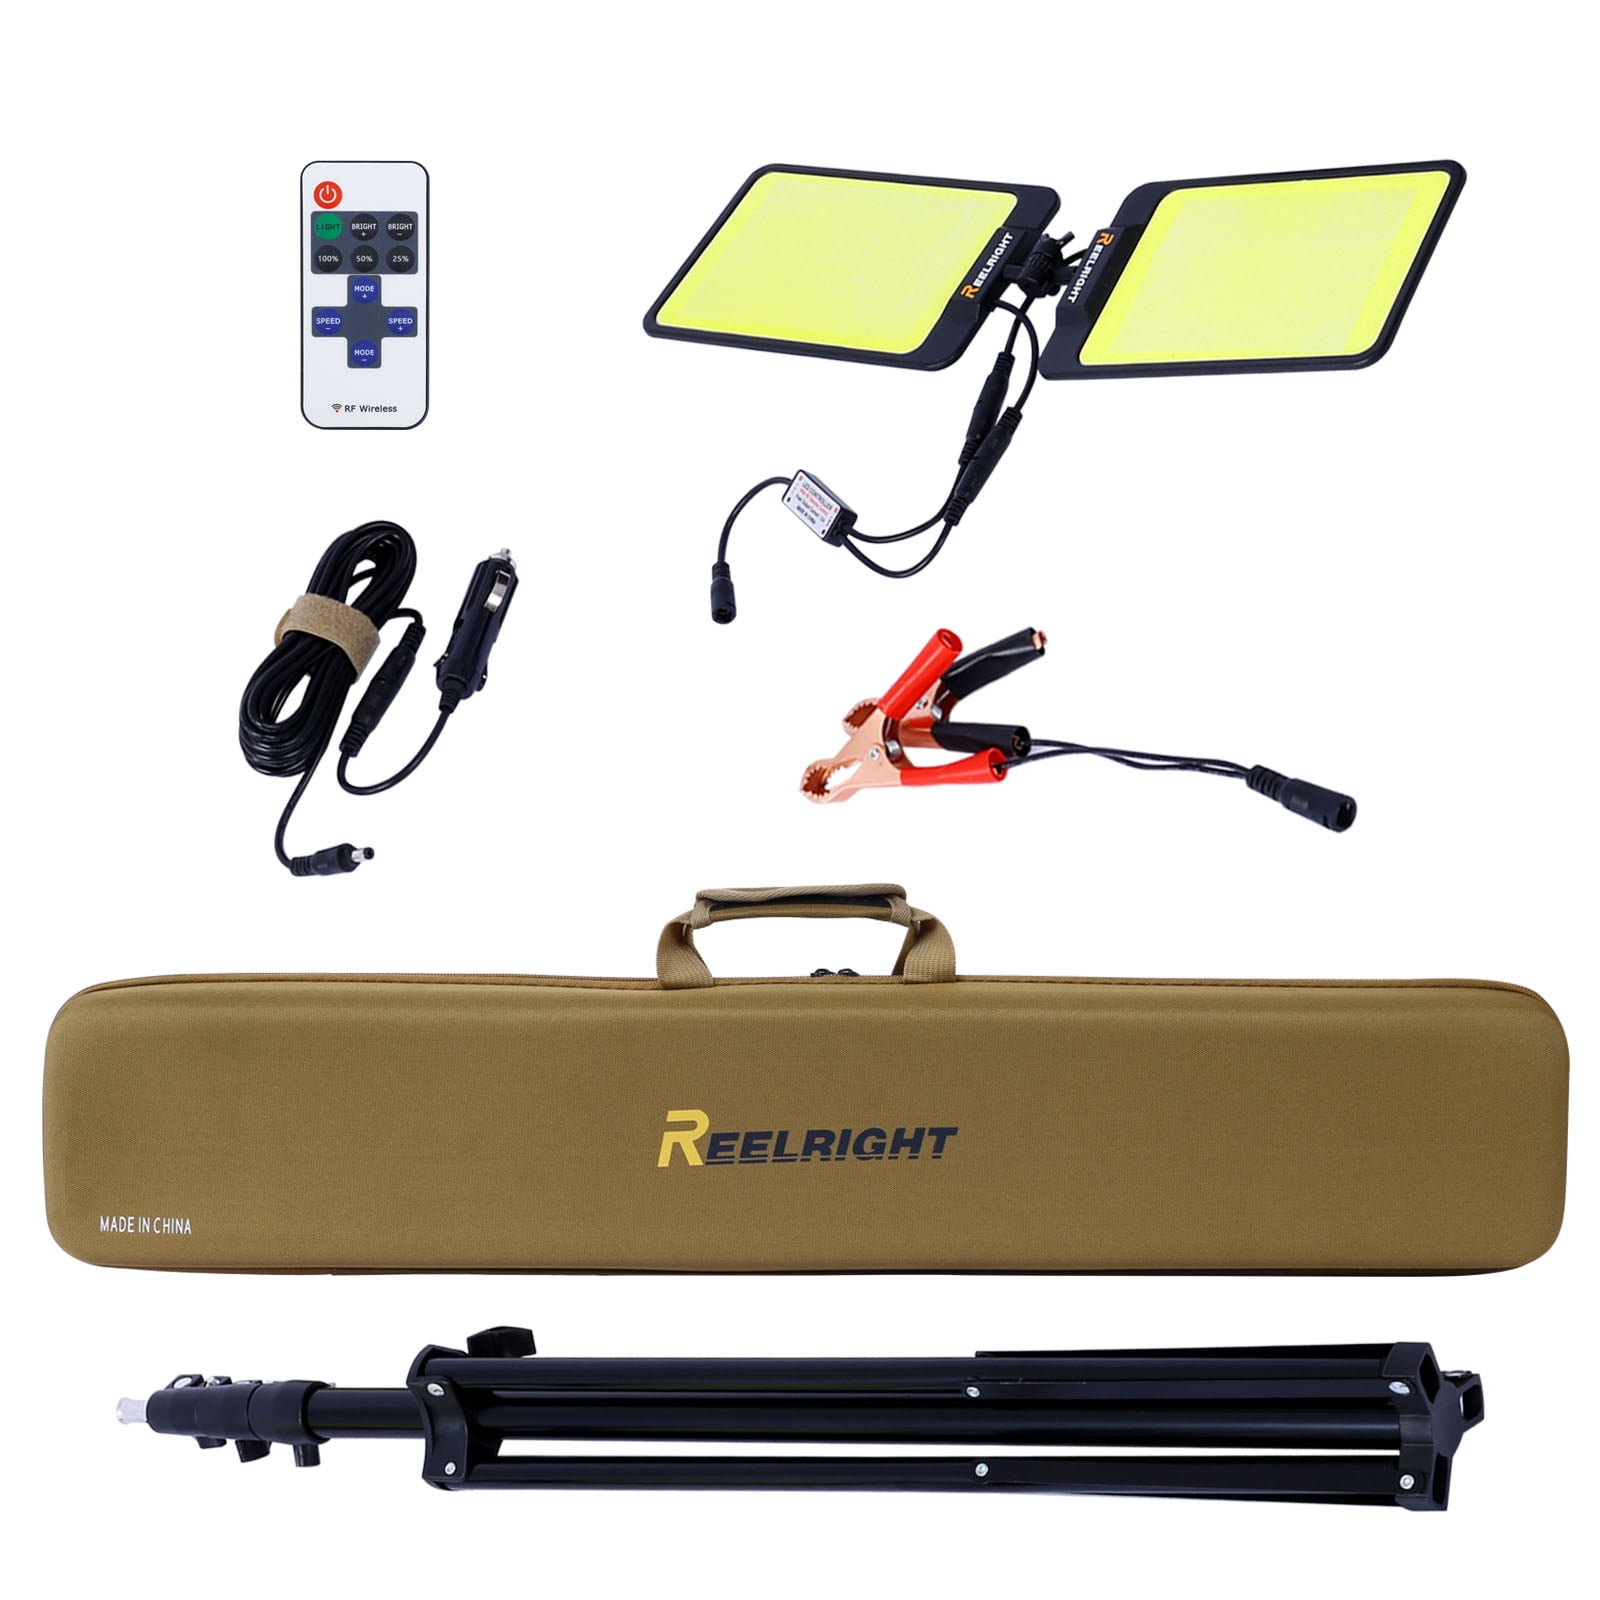 Sunpez 15000 Lumens LED Camping Lights Portable Outdoor Emergency